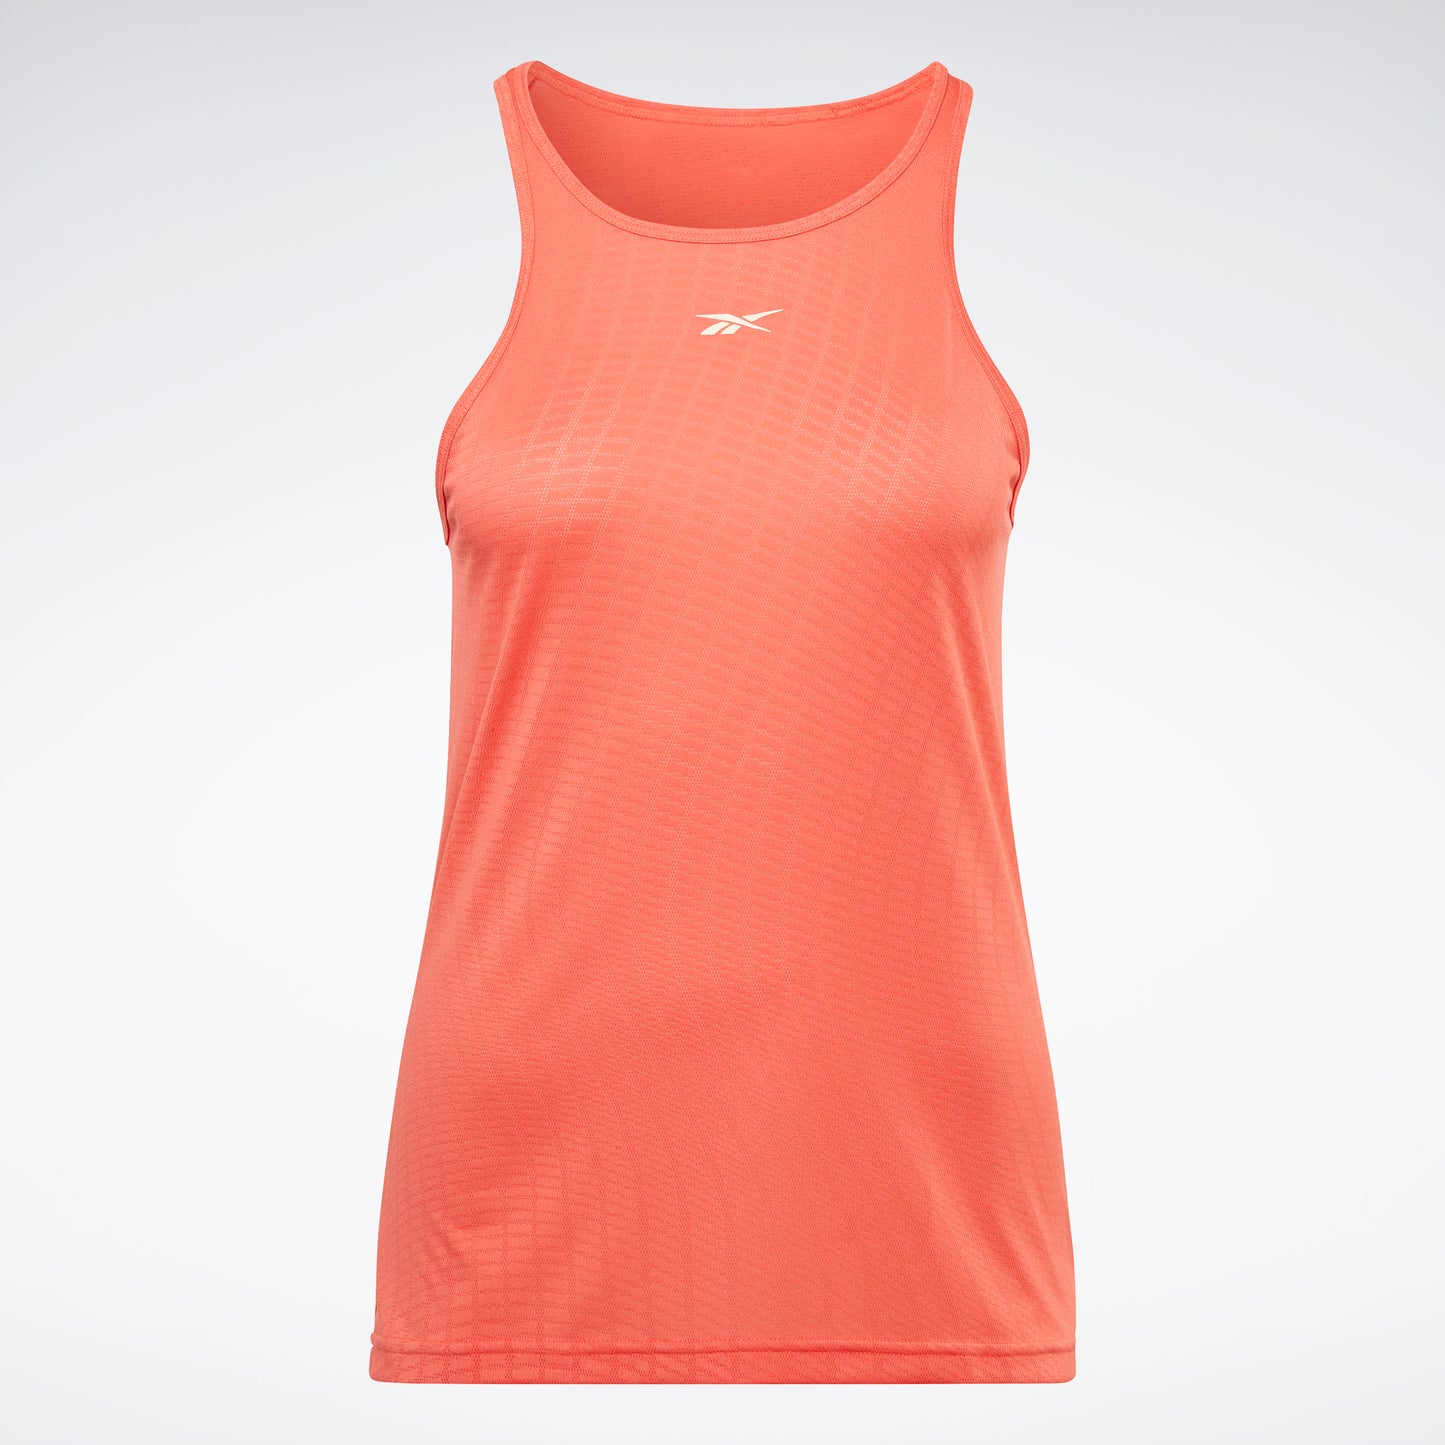 Reebok Apparel Women United By Fitness Perforated Tank Top Smorfl